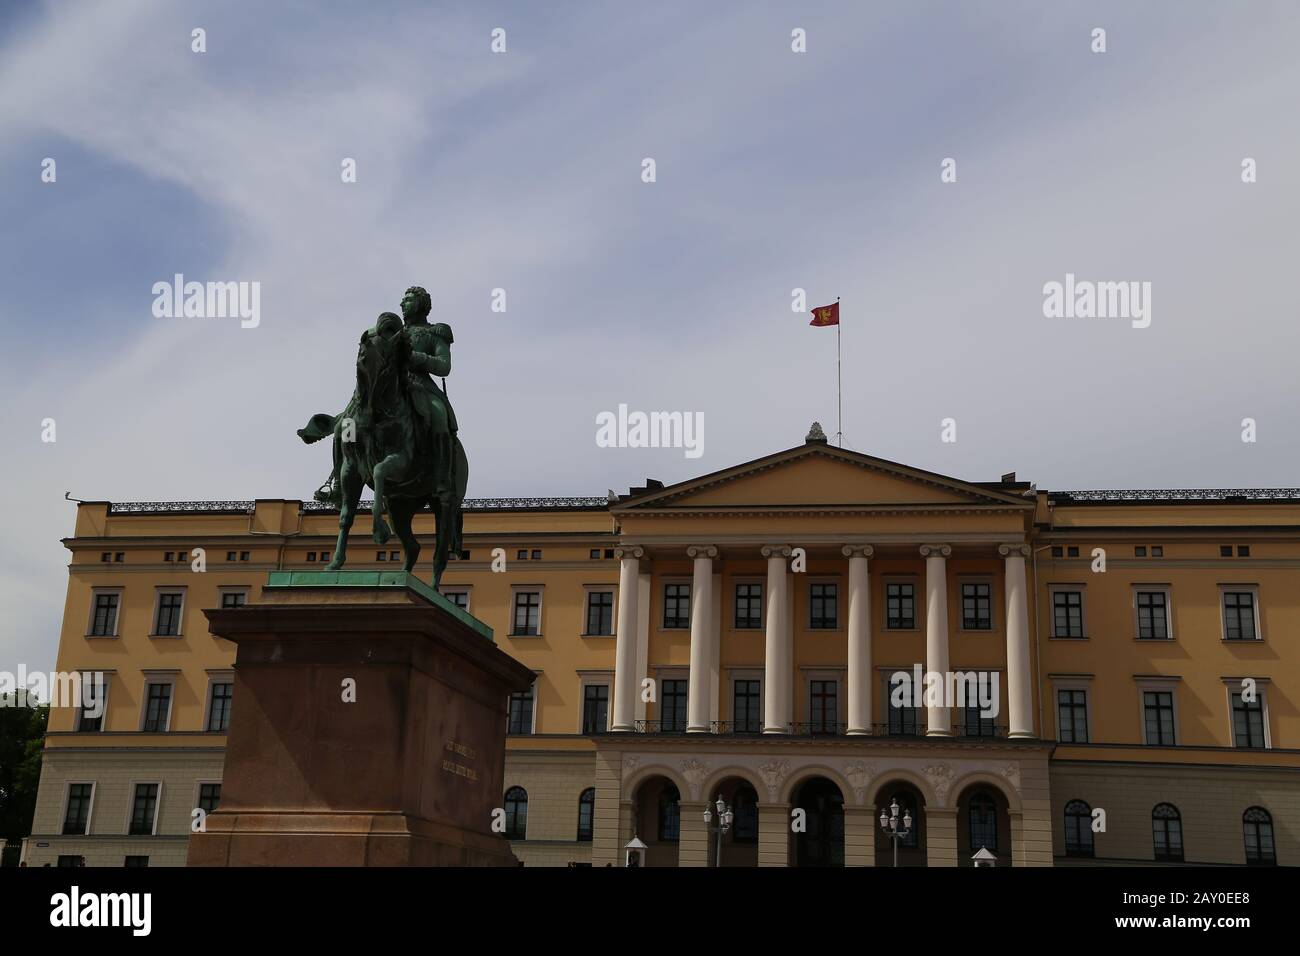 The Royal Palace in Oslo, the capital of Norway. People tourists walking on the palace grounds on a summer day Stock Photo